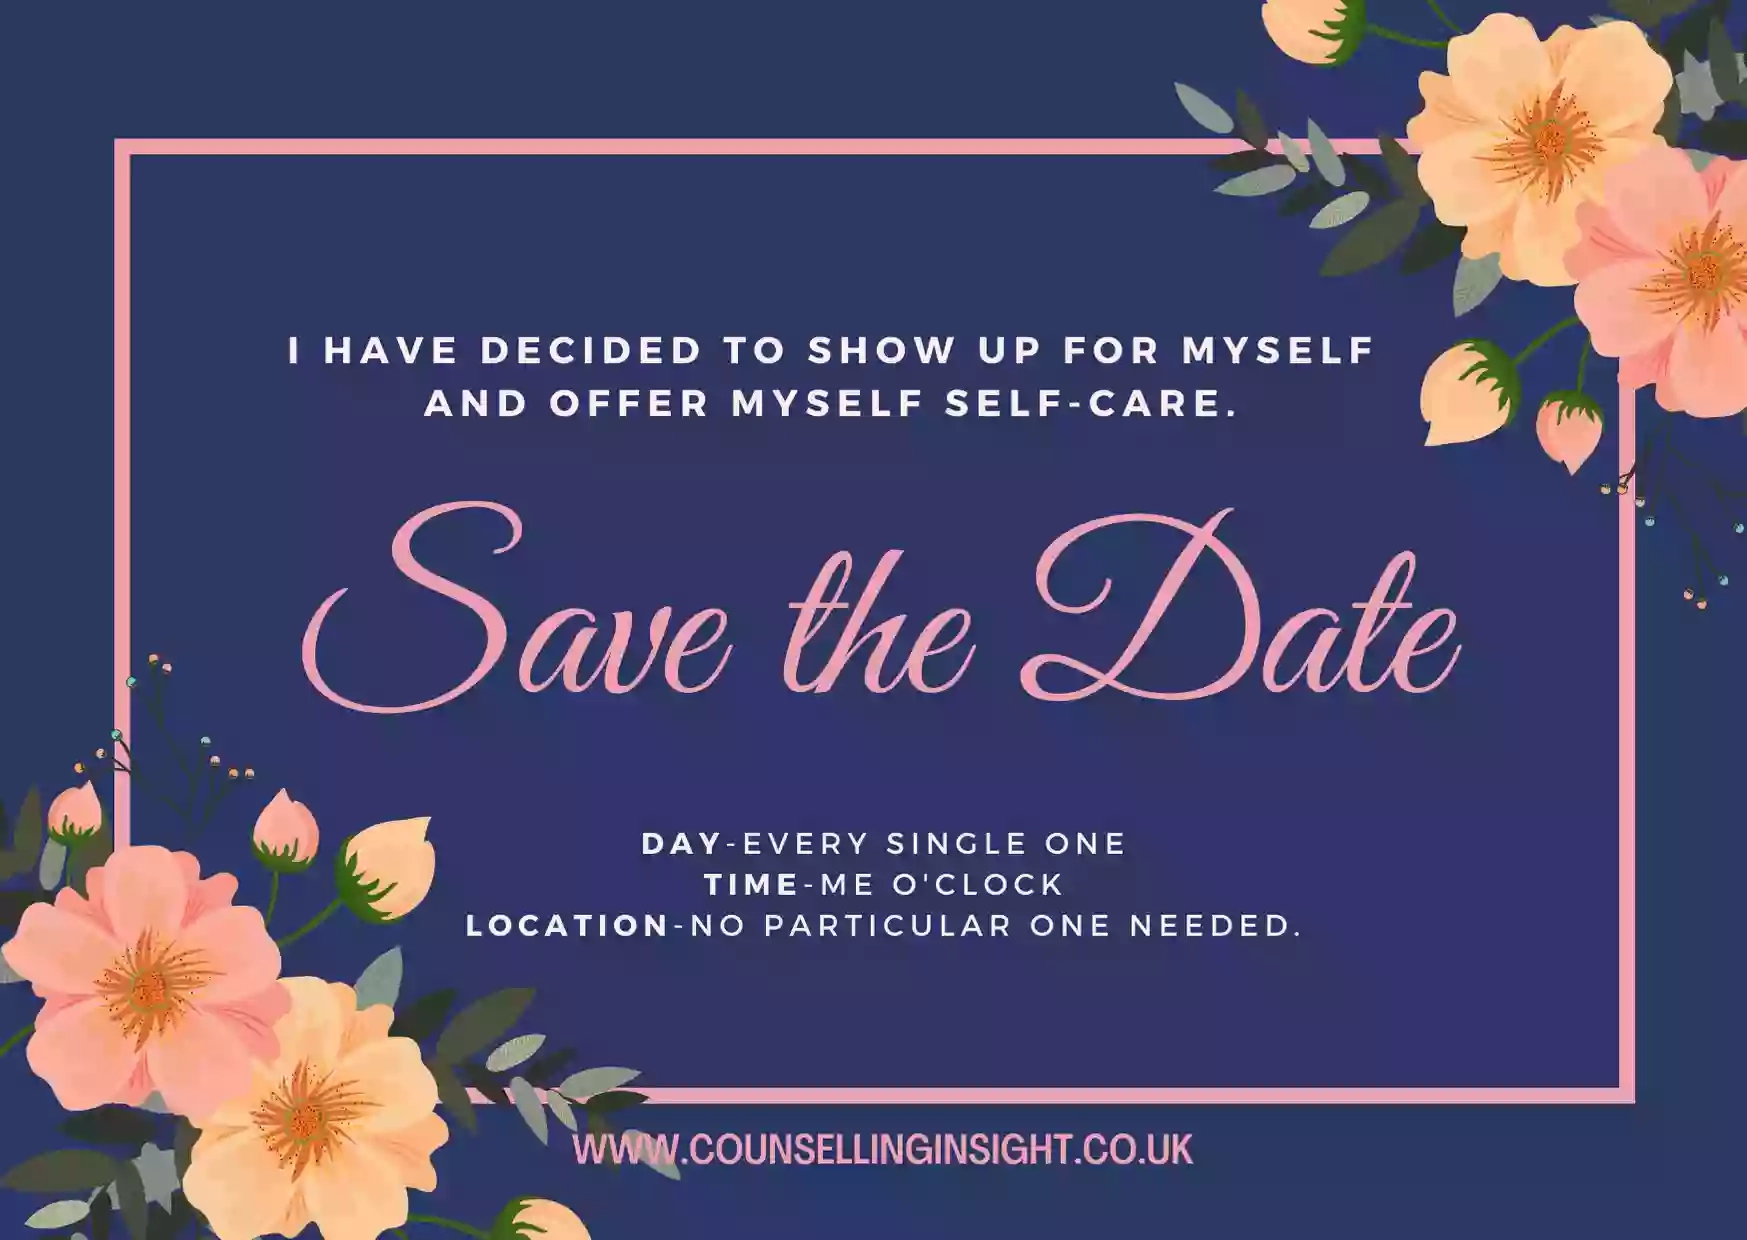 Counselling Insight